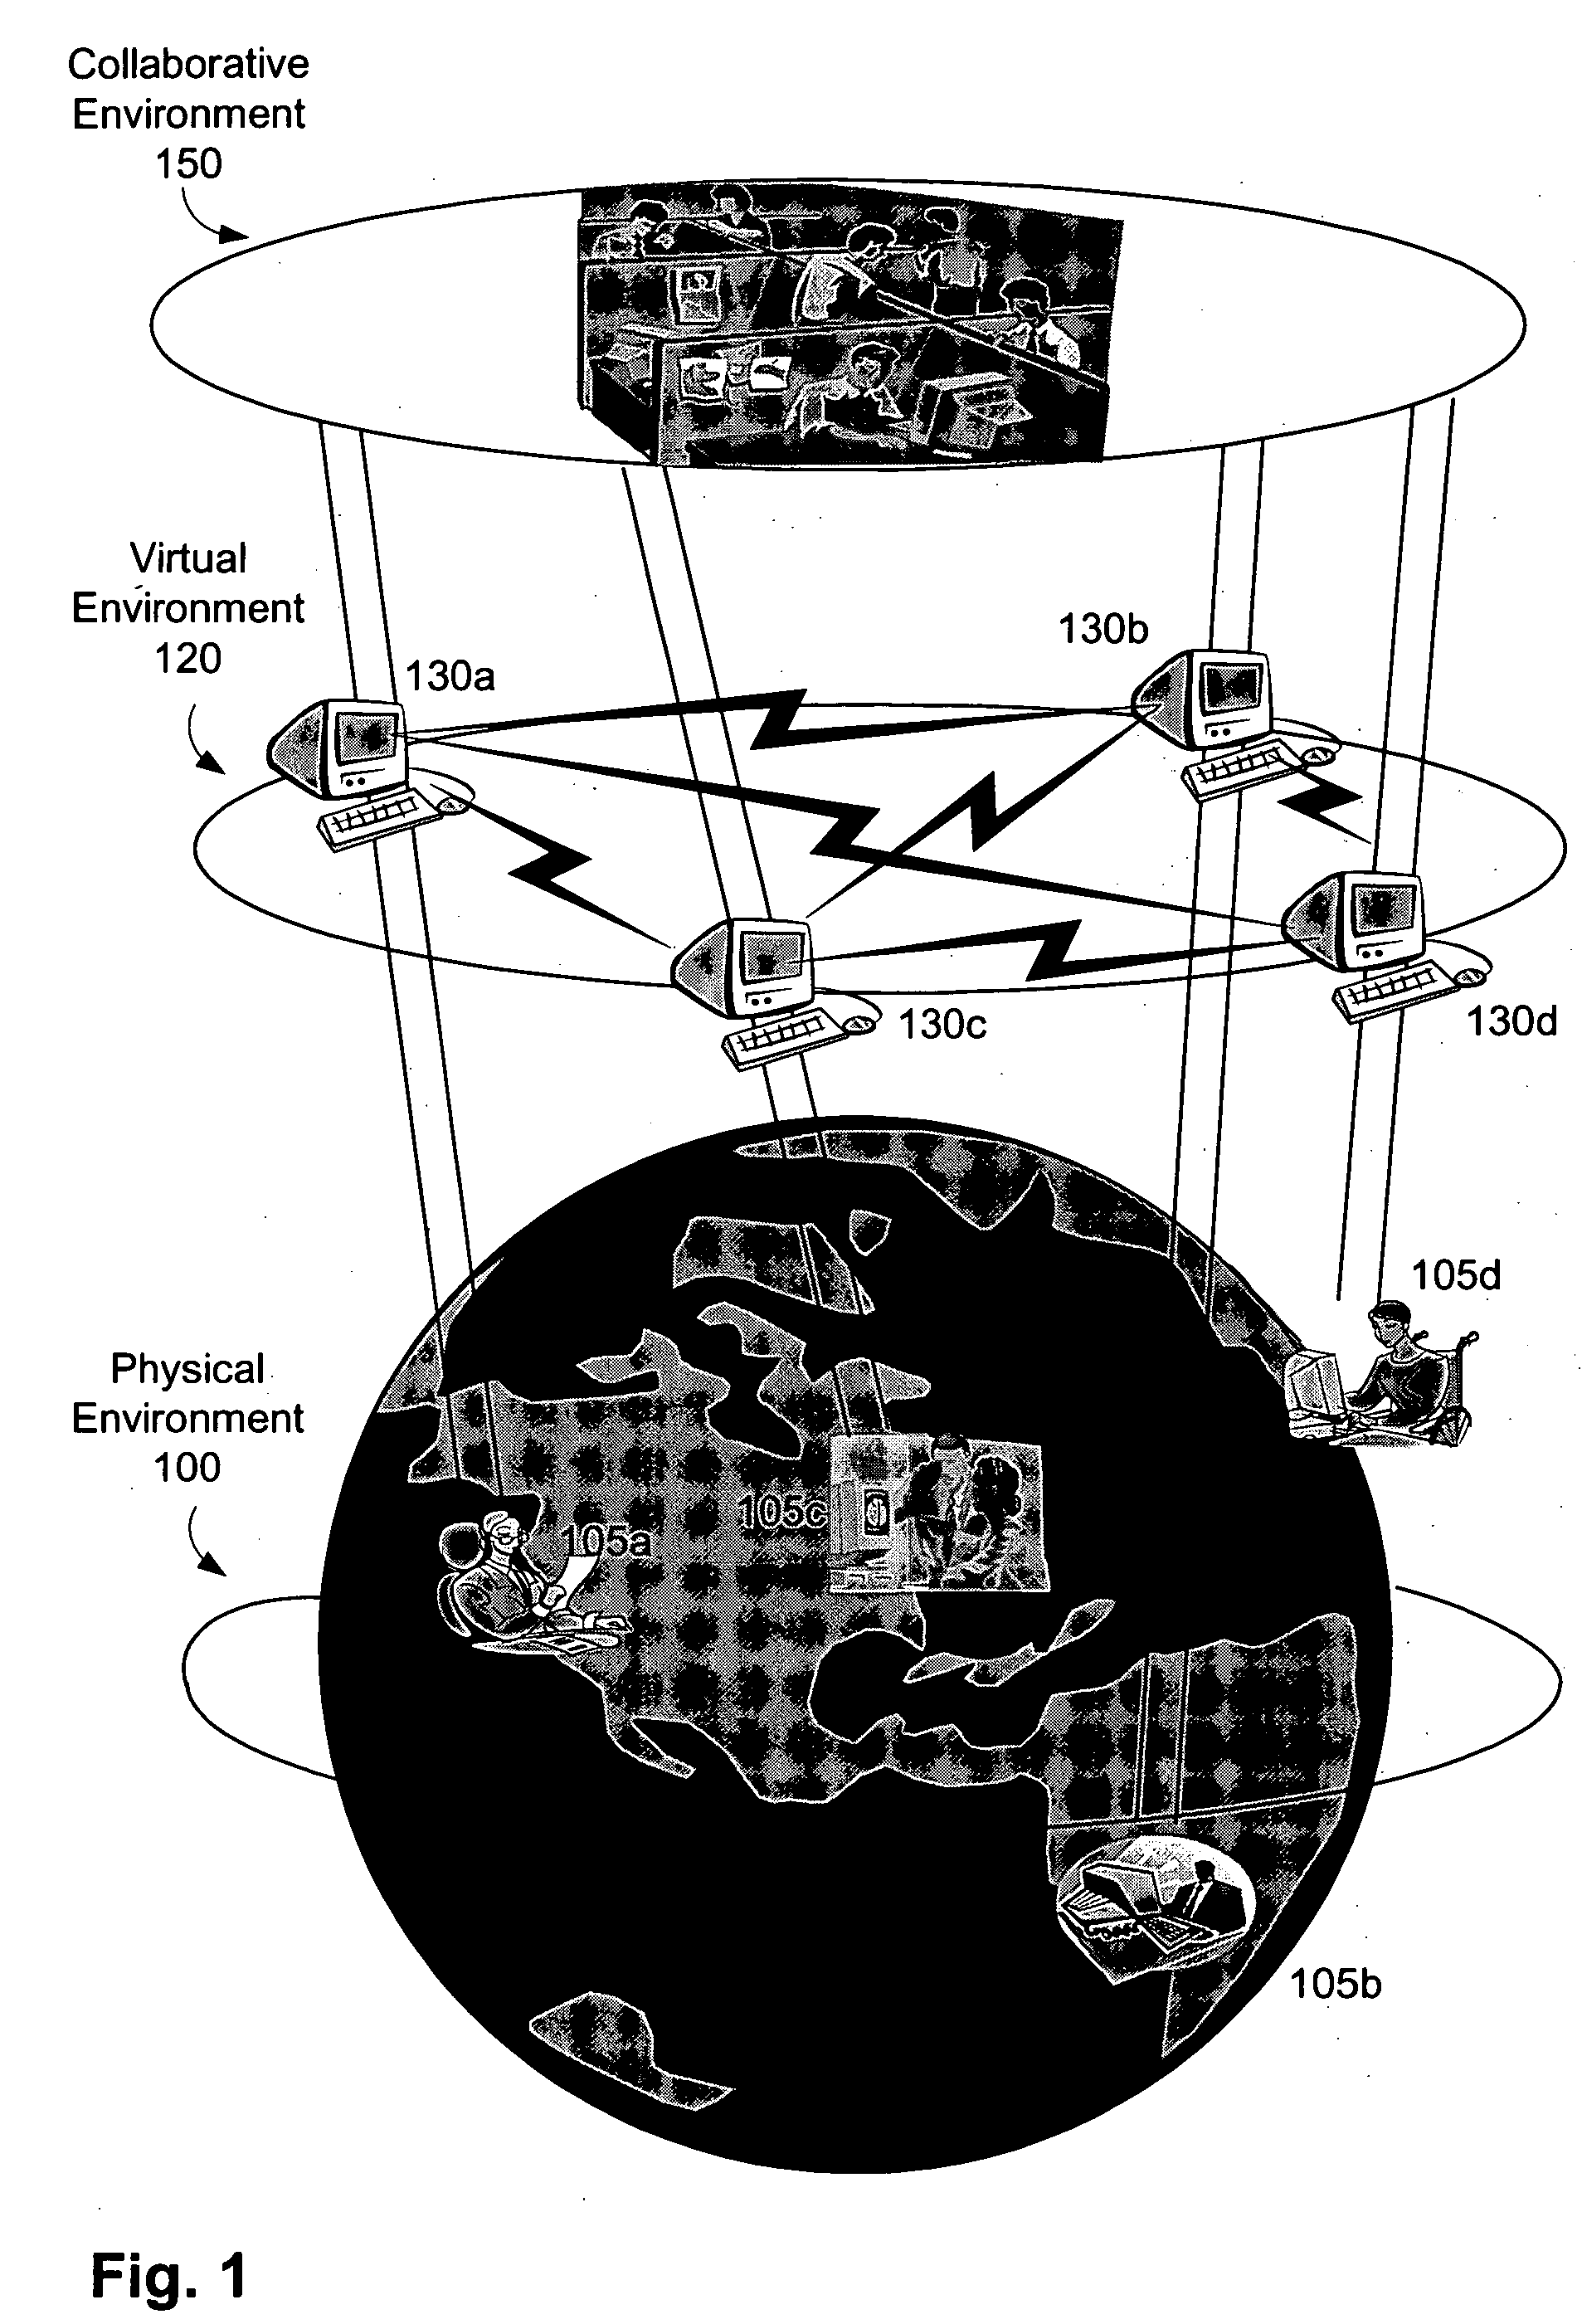 System and method for collaborative systems engineering